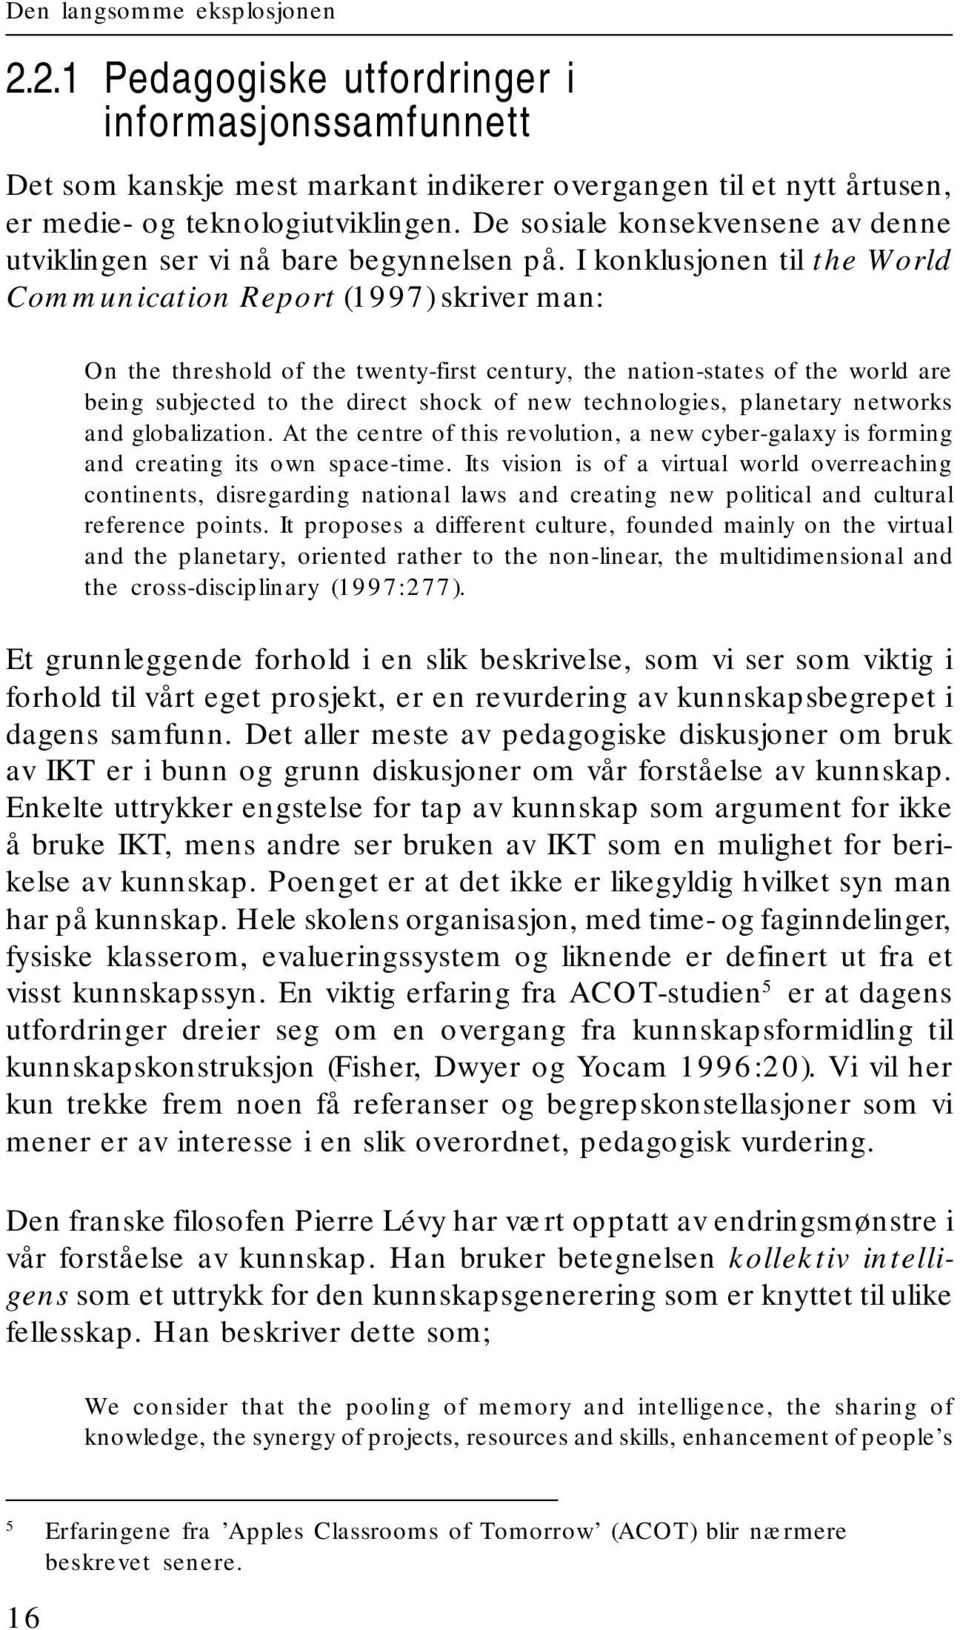 I konklusjonen til the World Communication Report (1997) skriver man: On the threshold of the twenty-first century, the nation-states of the world are being subjected to the direct shock of new